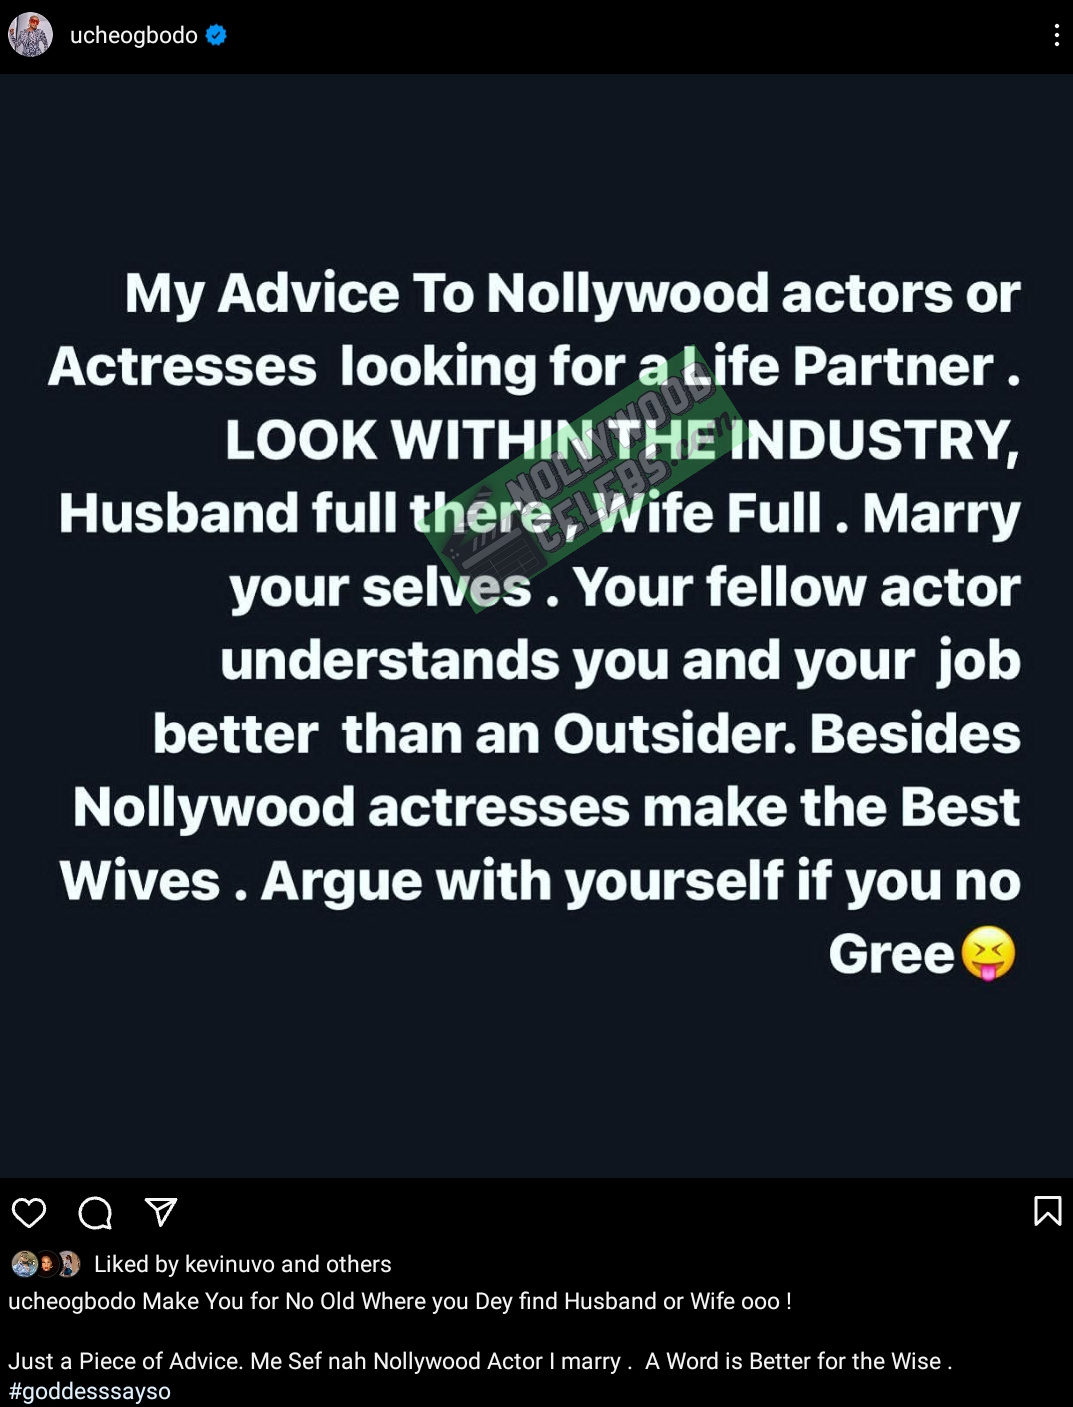 Uche Ogbodo Advice For Nollywood Actors Looking for Life Partners (2)